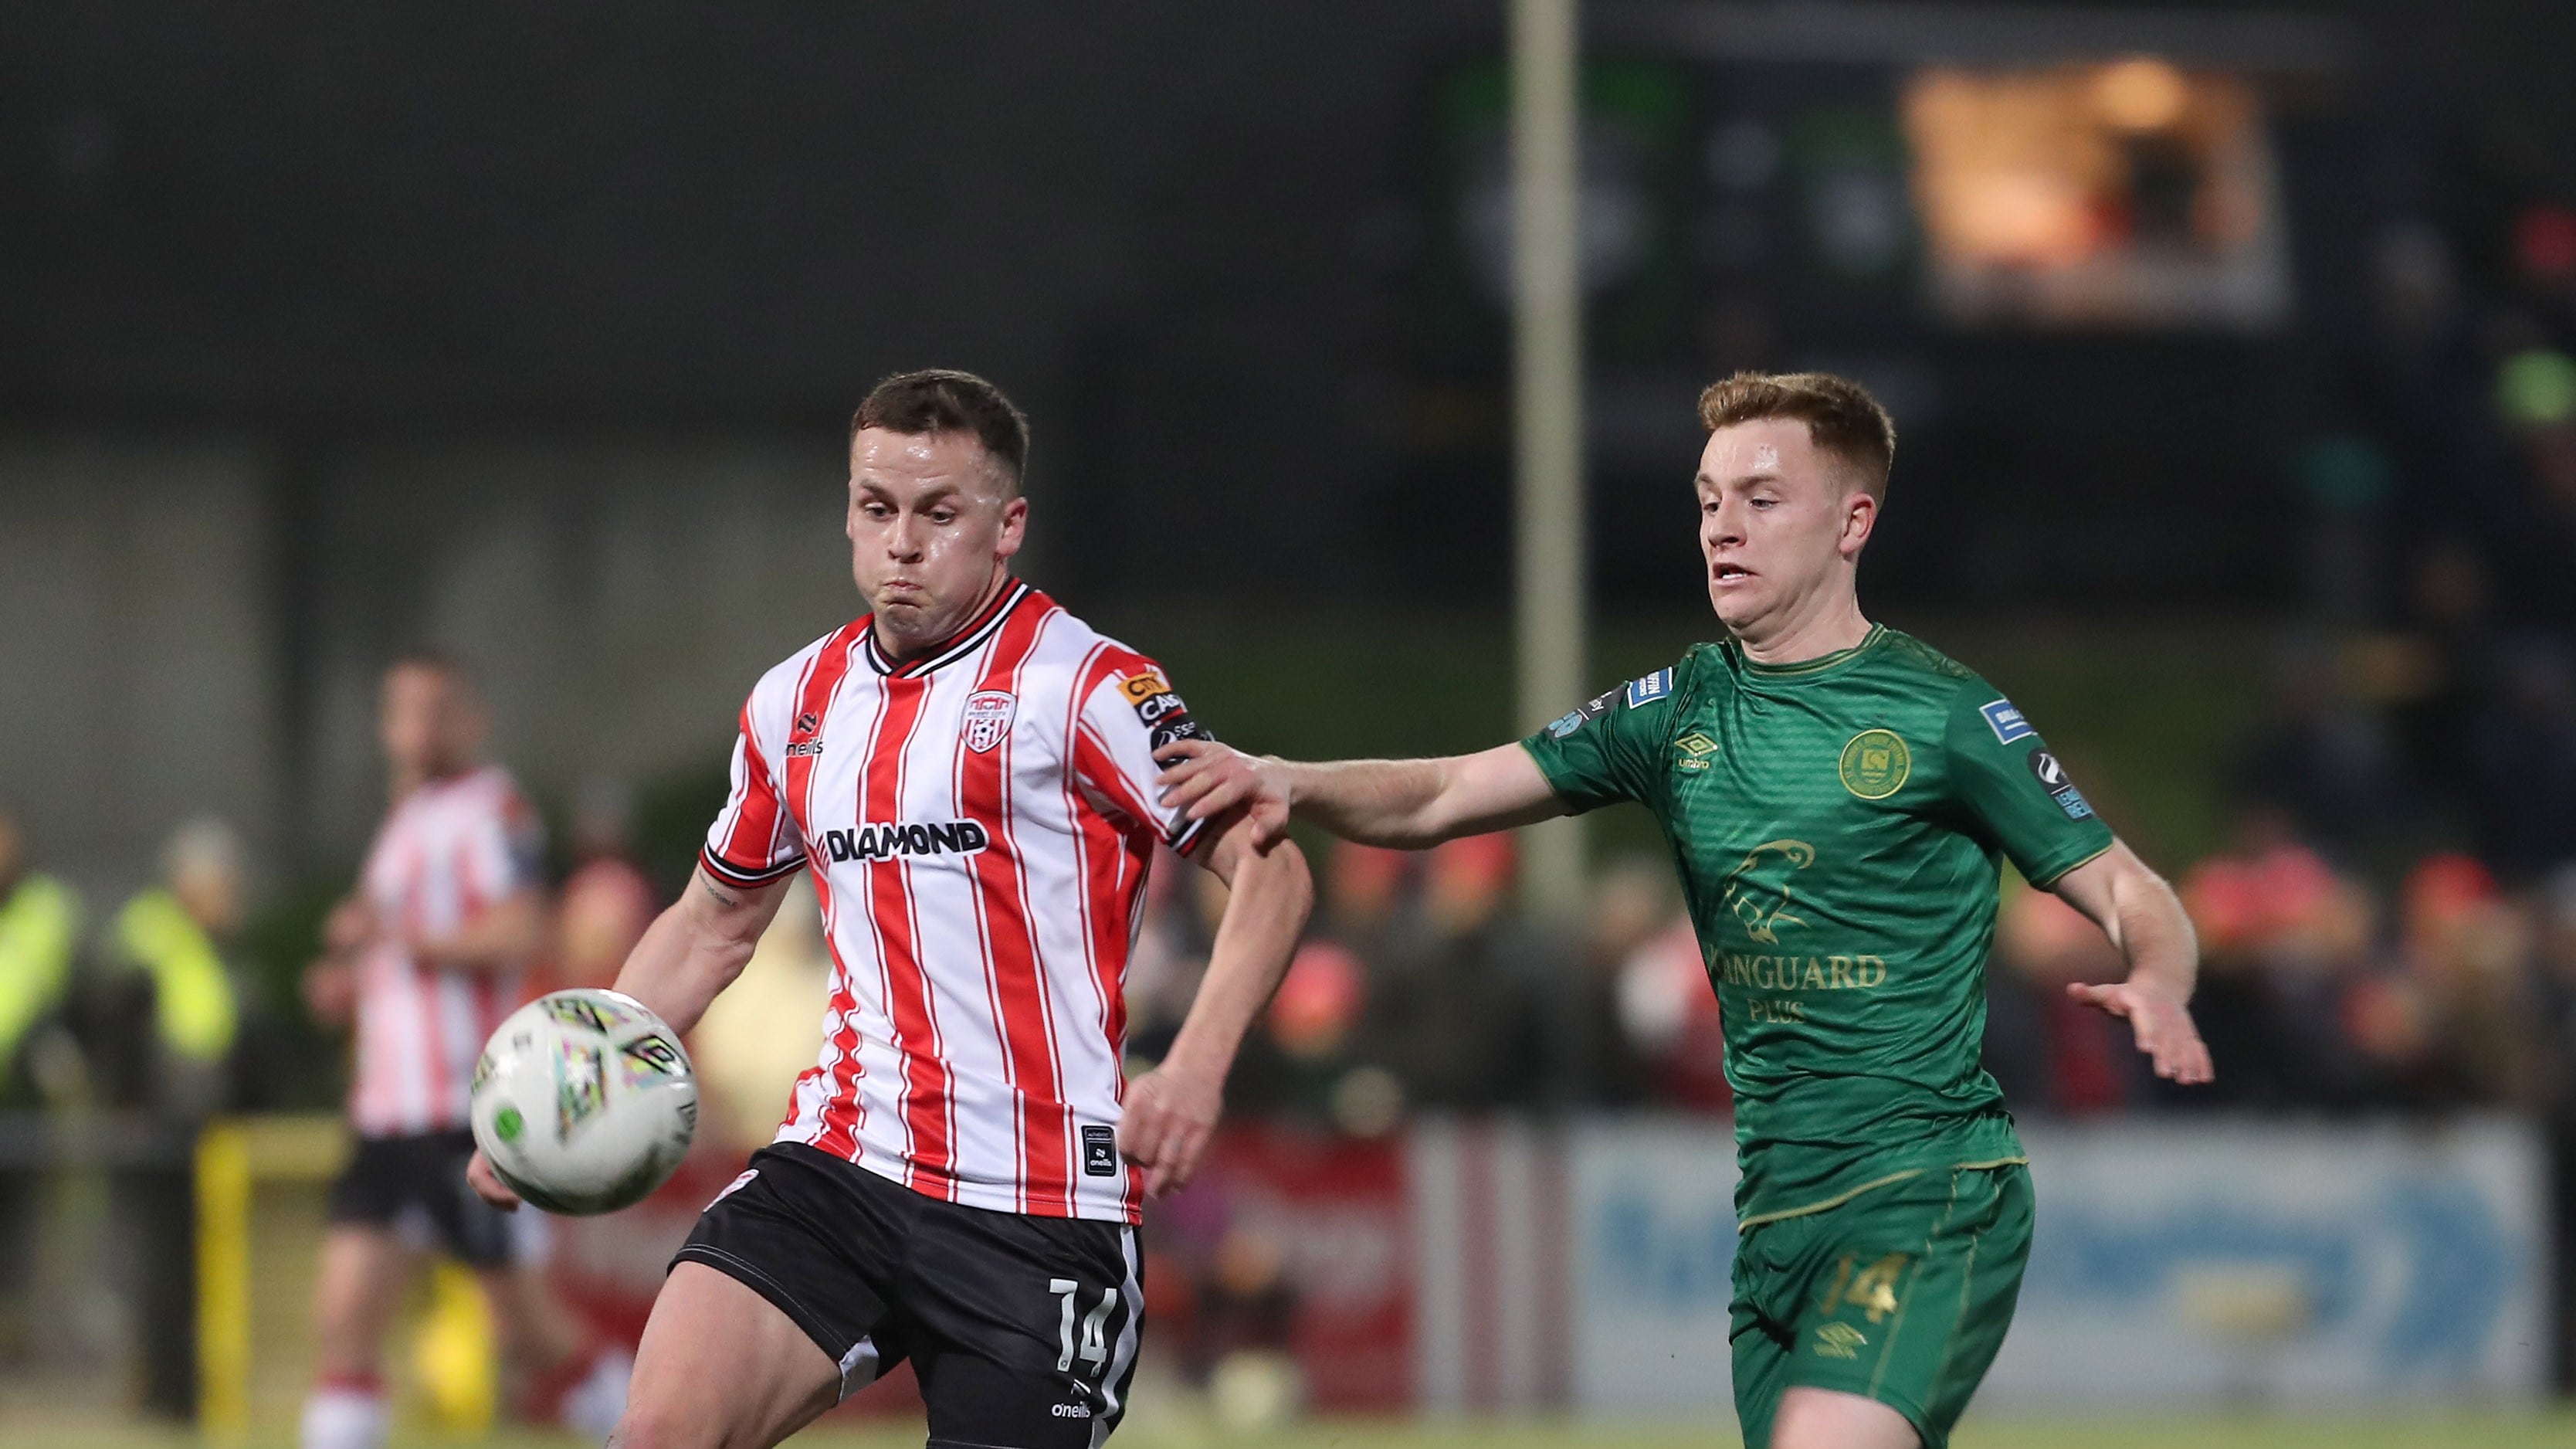 Derry City's Ben Doherty in action against St Pat's Athletic on Friday night
Picture: Margaret McLaughlin